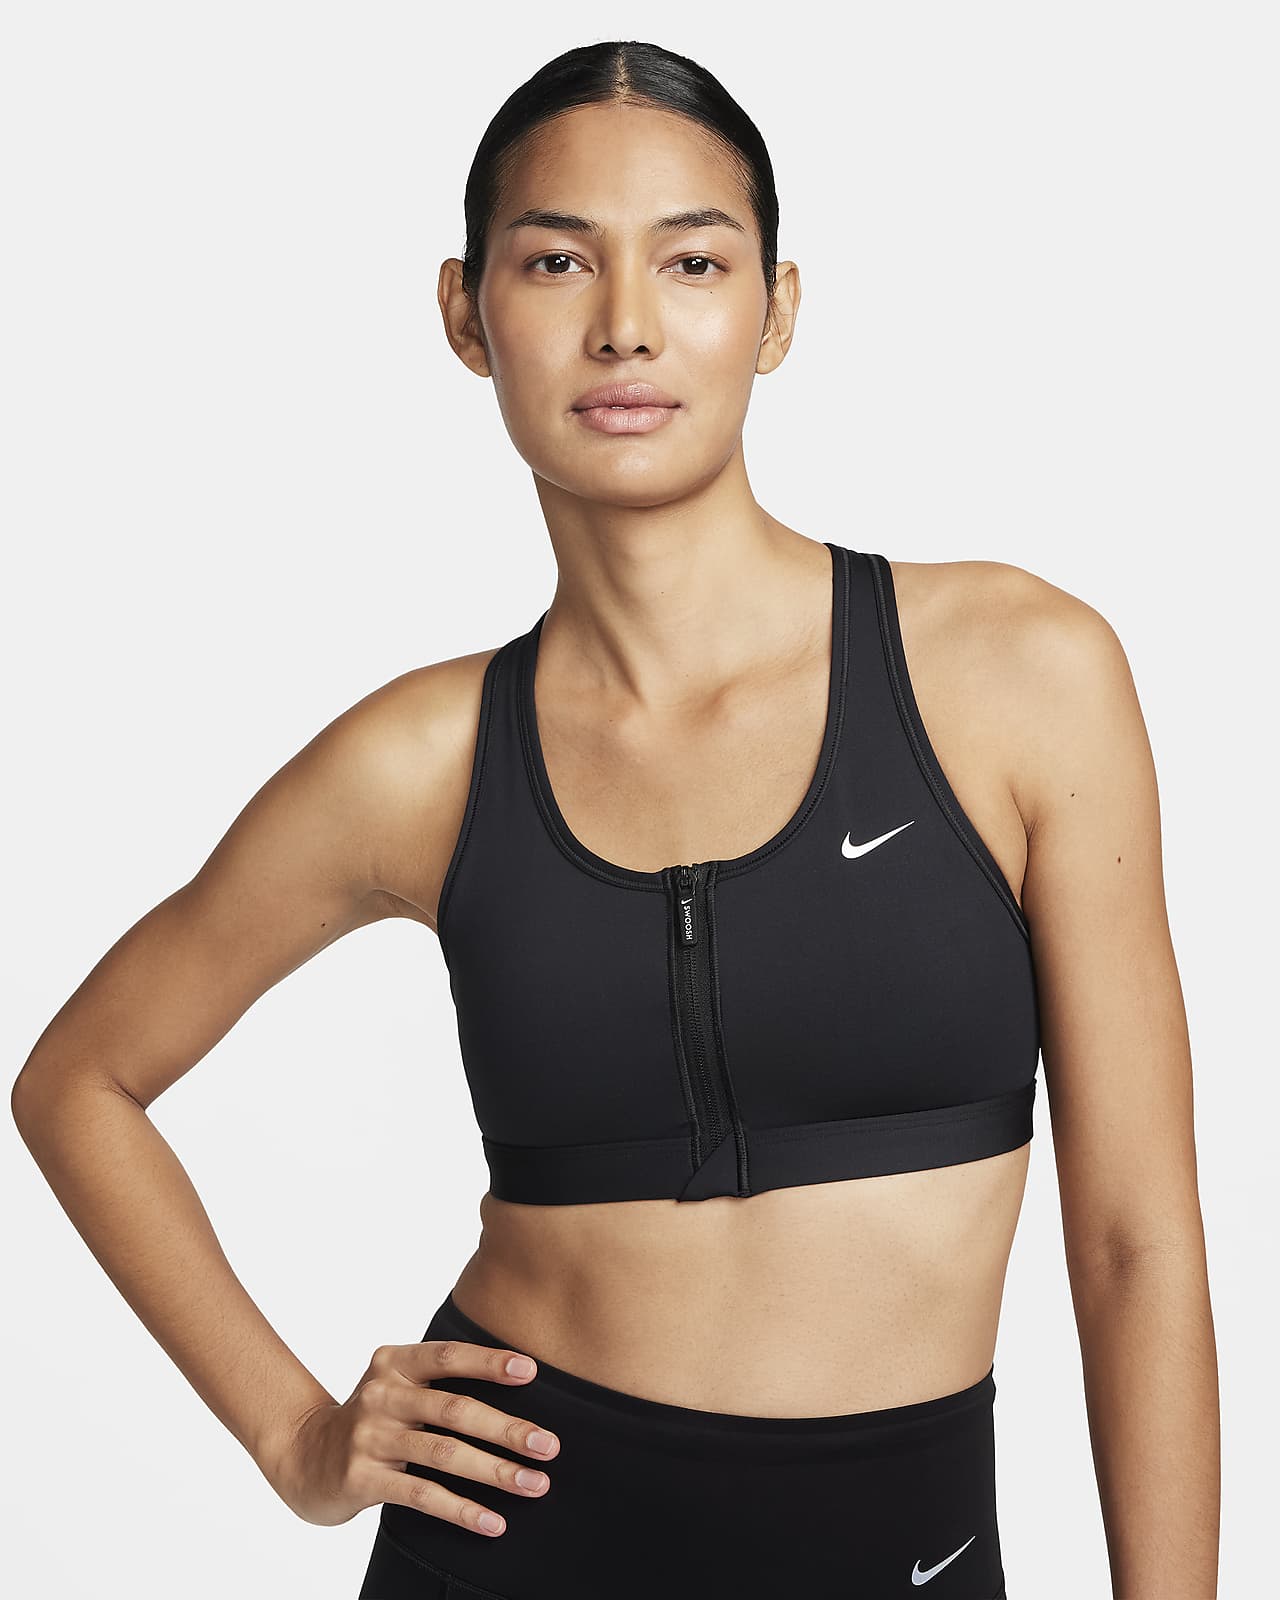 NEW with tags Nike air halter sports bra, Women's Fashion